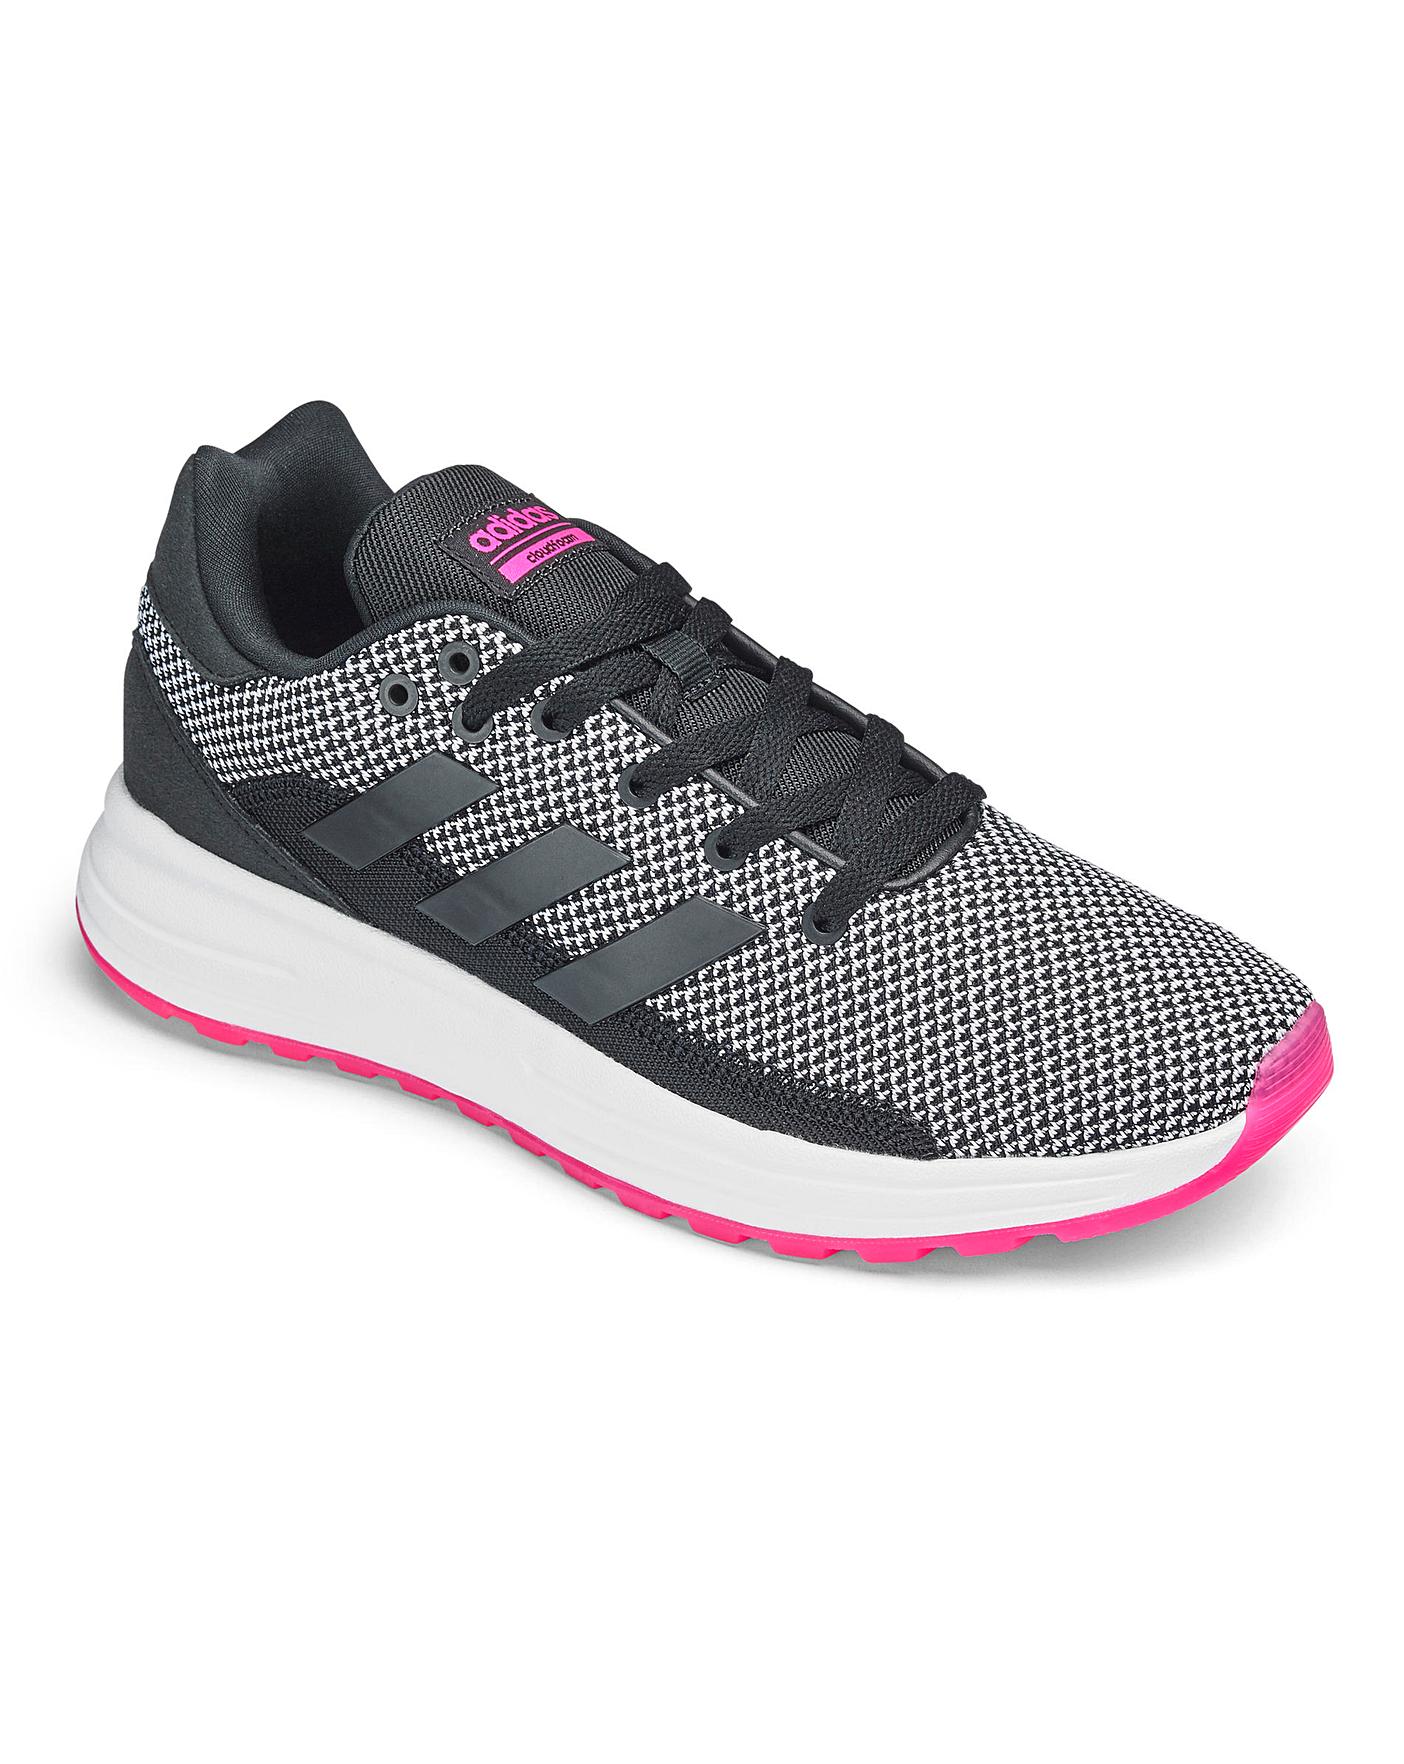 Adidas Cloudfoam Racer 9S Trainers | Crazy Clearance